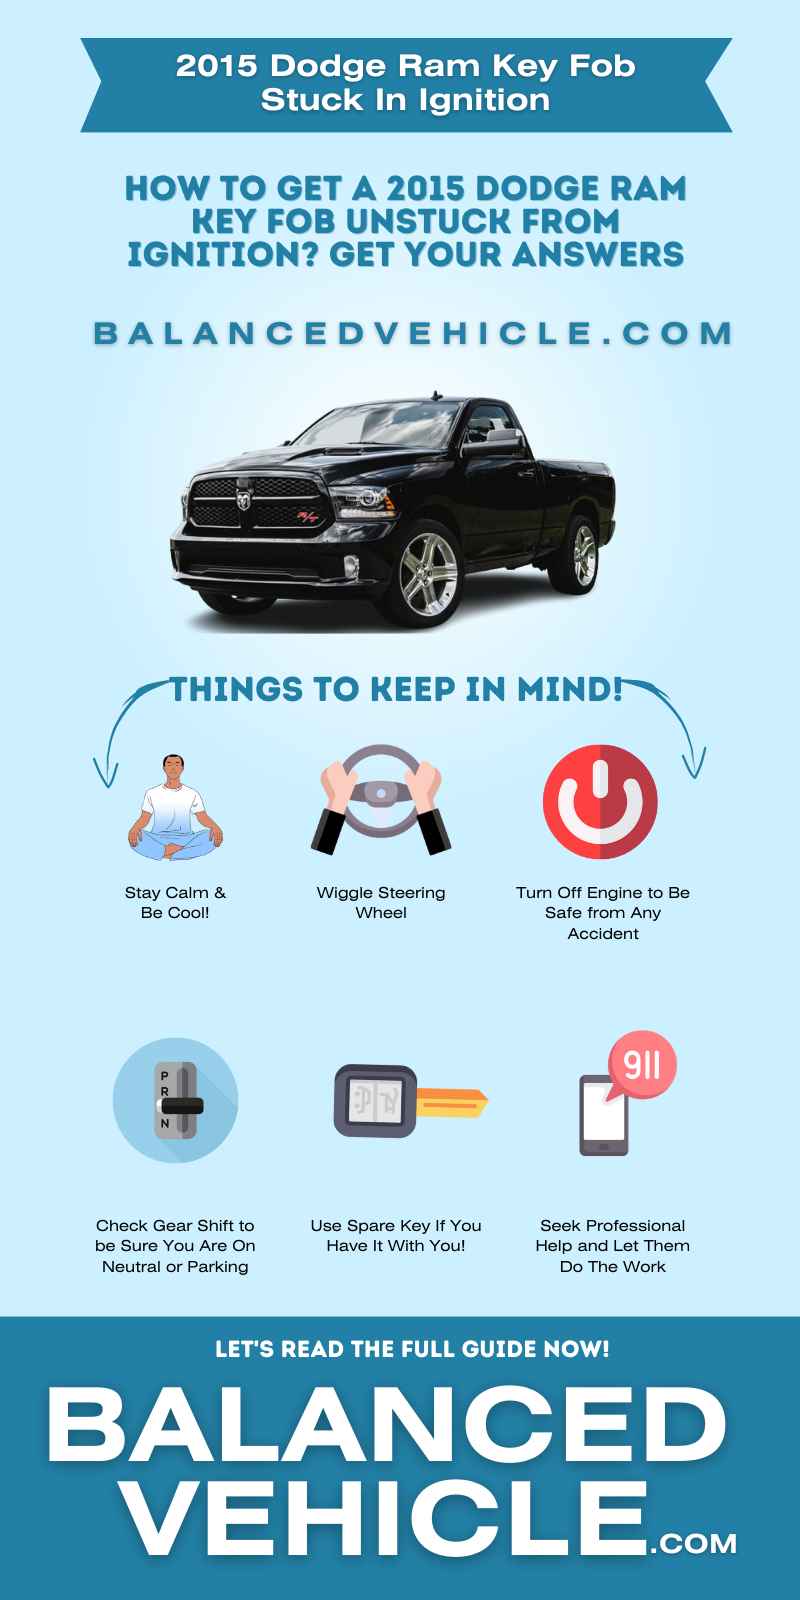 2015 Dodge Ram key fob stuck in ignition - Infographic